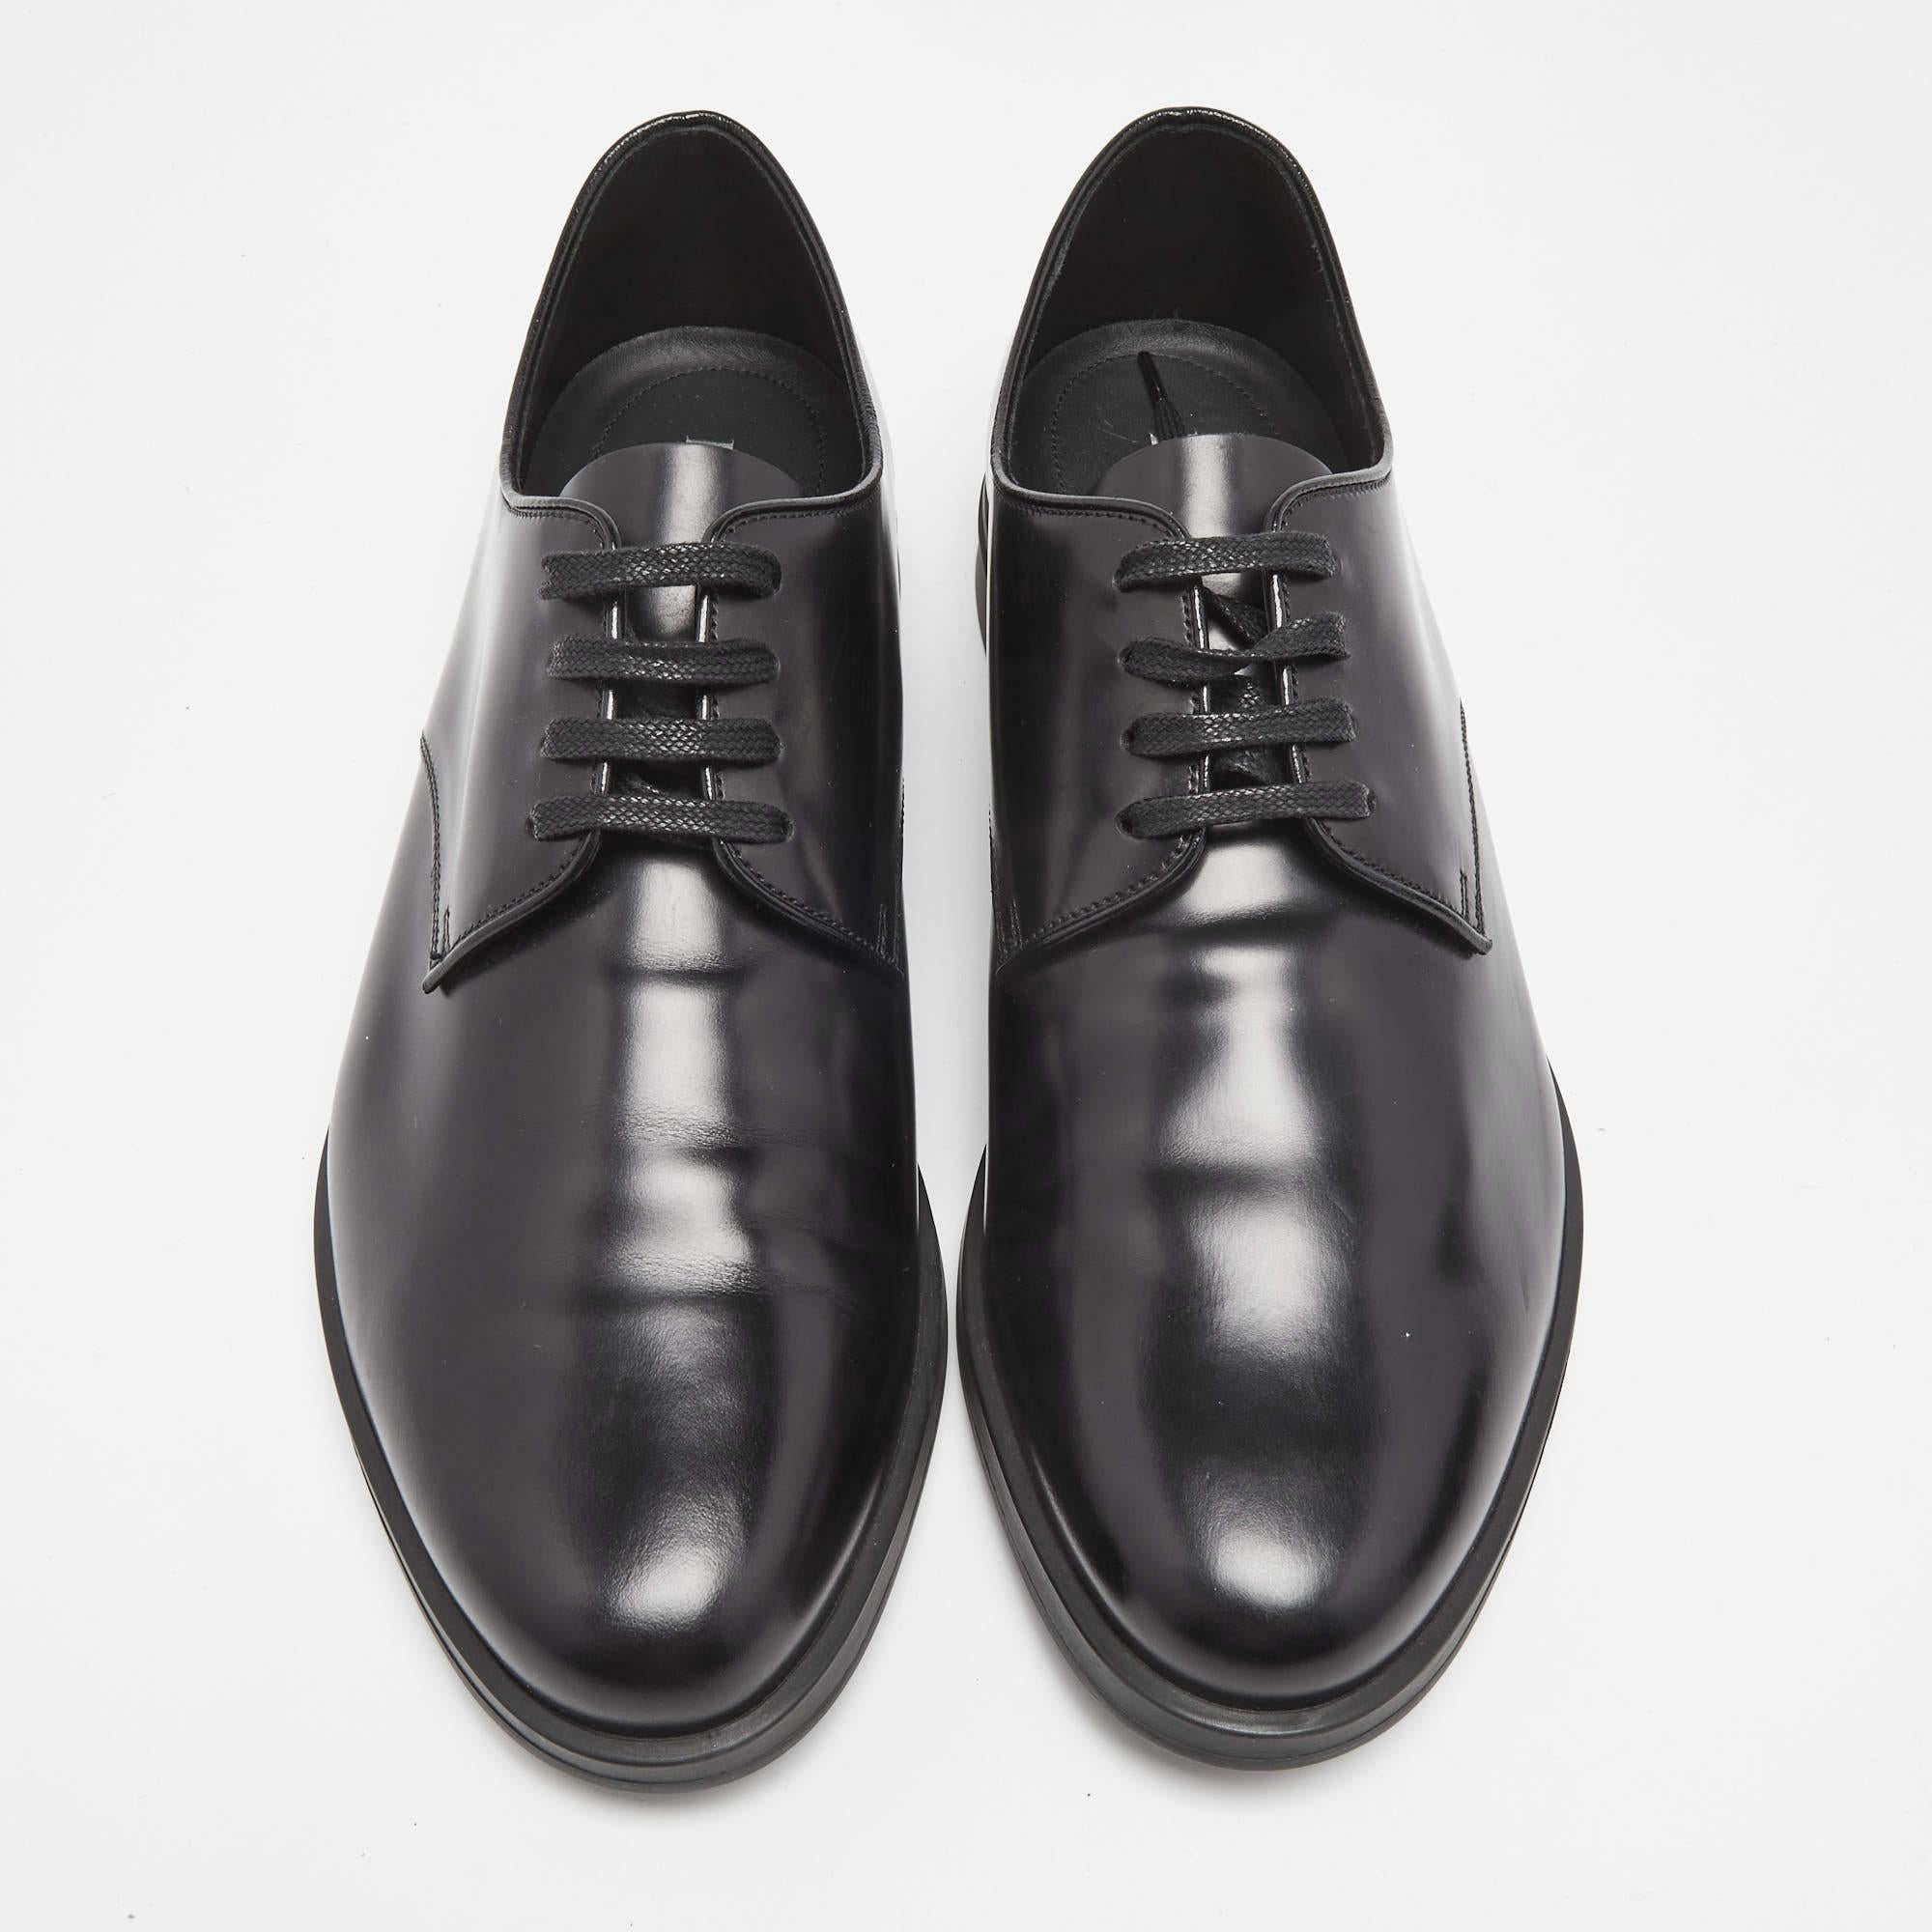 Elevate your look by adding these Prada smart shoes to your ensemble. They make a sharp statement piece to heighten your daily outfits or to wear on special occasions.

